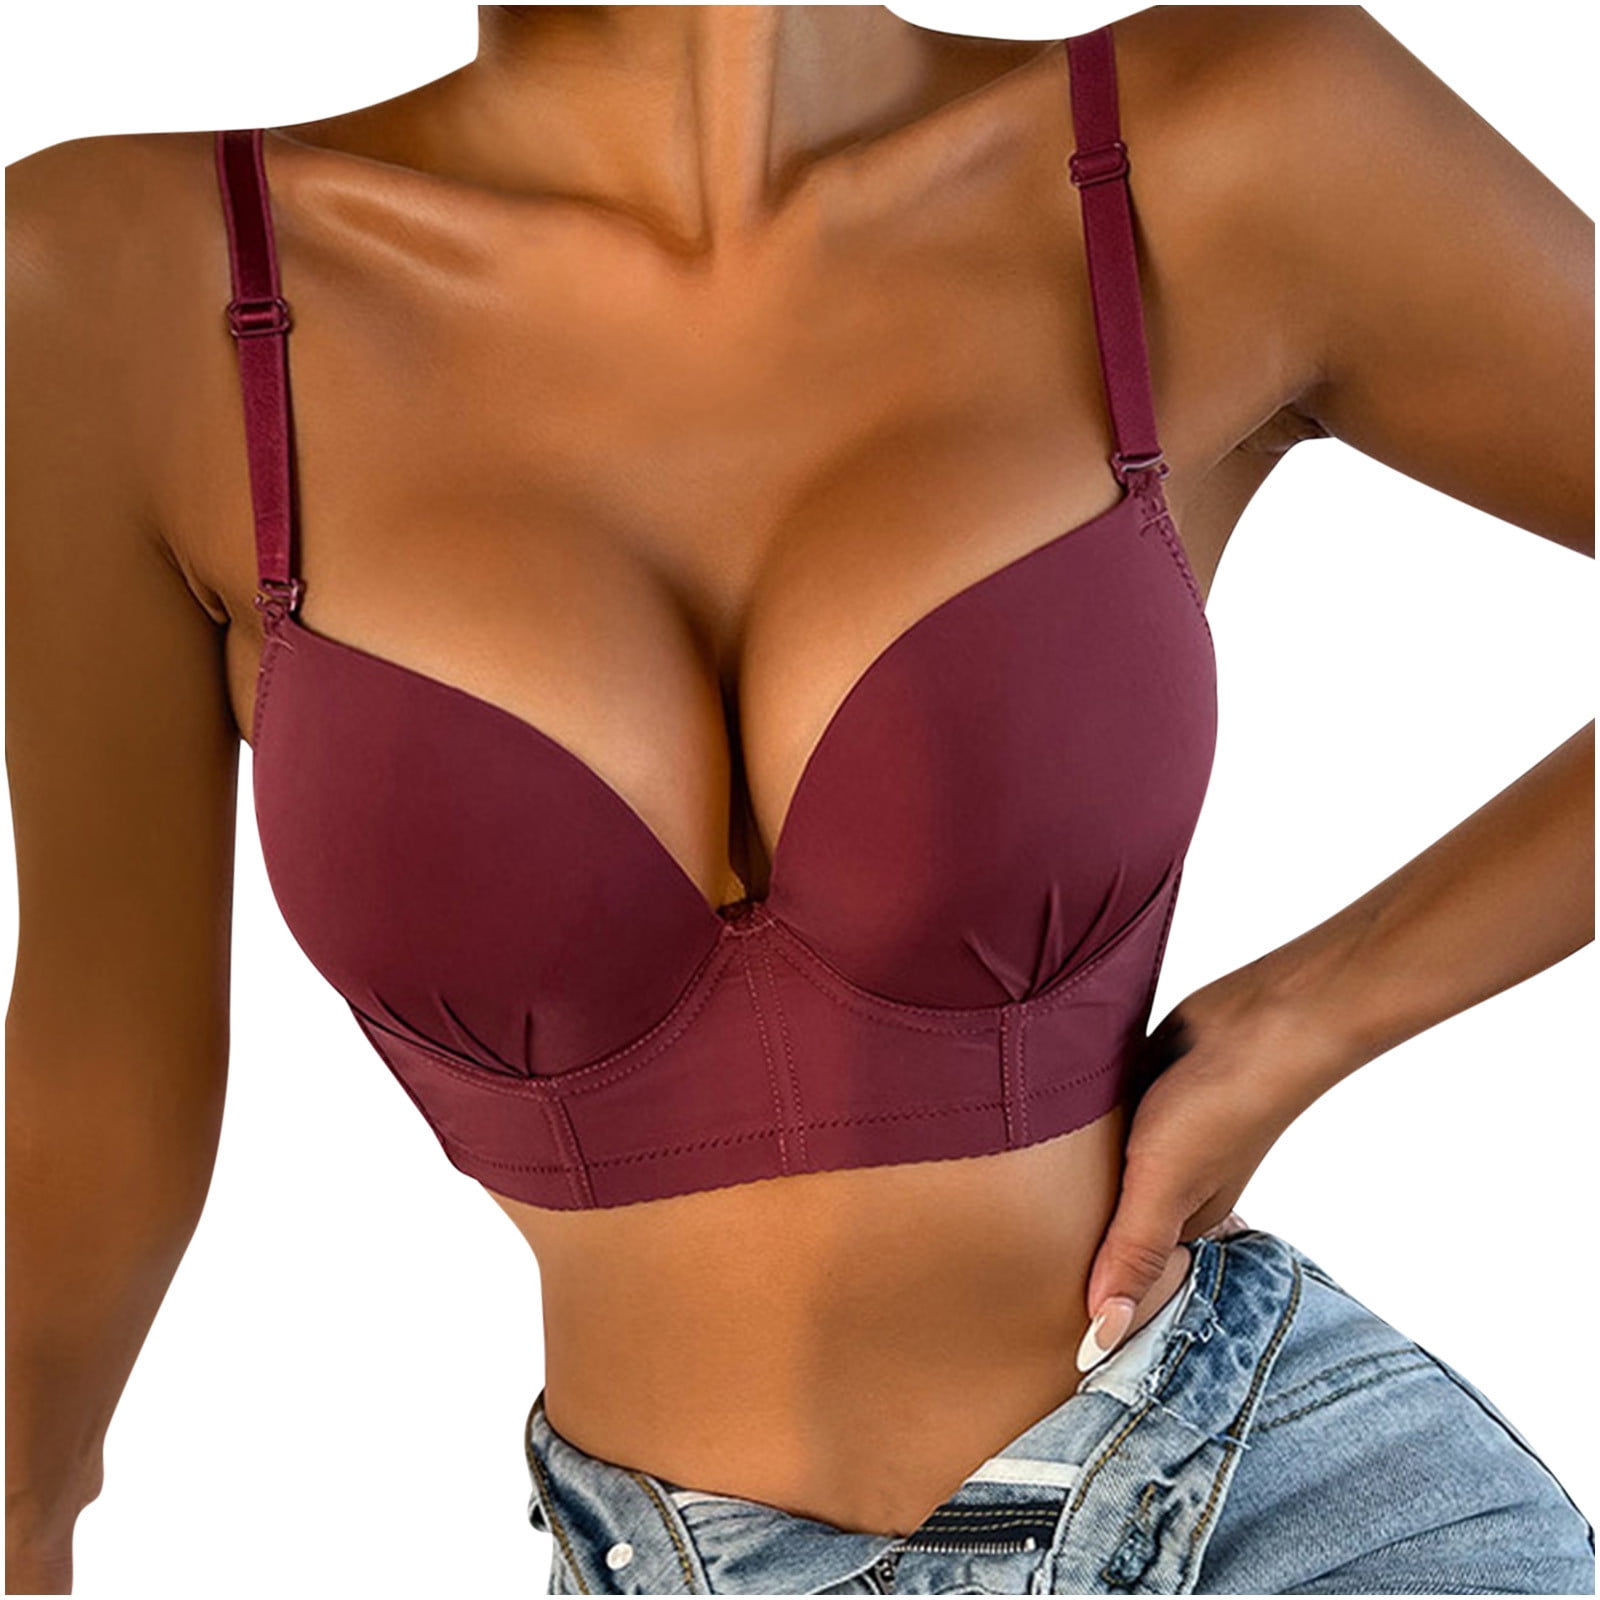 Women's Thin Underwear Set With Vest-Style Bra Tops That Reduces Big Breasts,  Lifts Sagging And Prevents Side Breast, Shockproof And No Trace For Sports